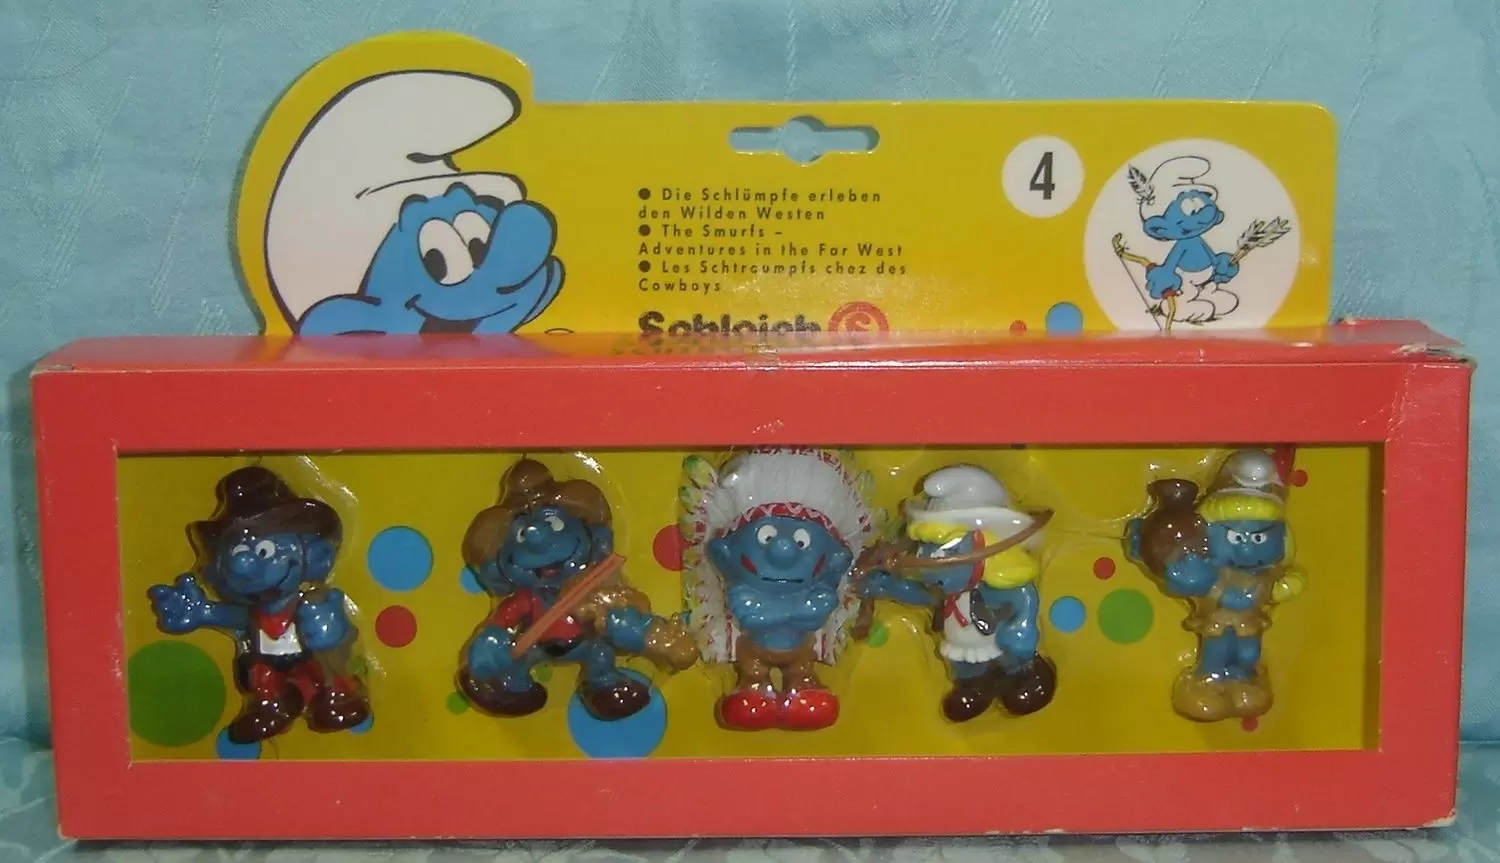 Smurf figure packs - The Smurfs Adventures in the Far West